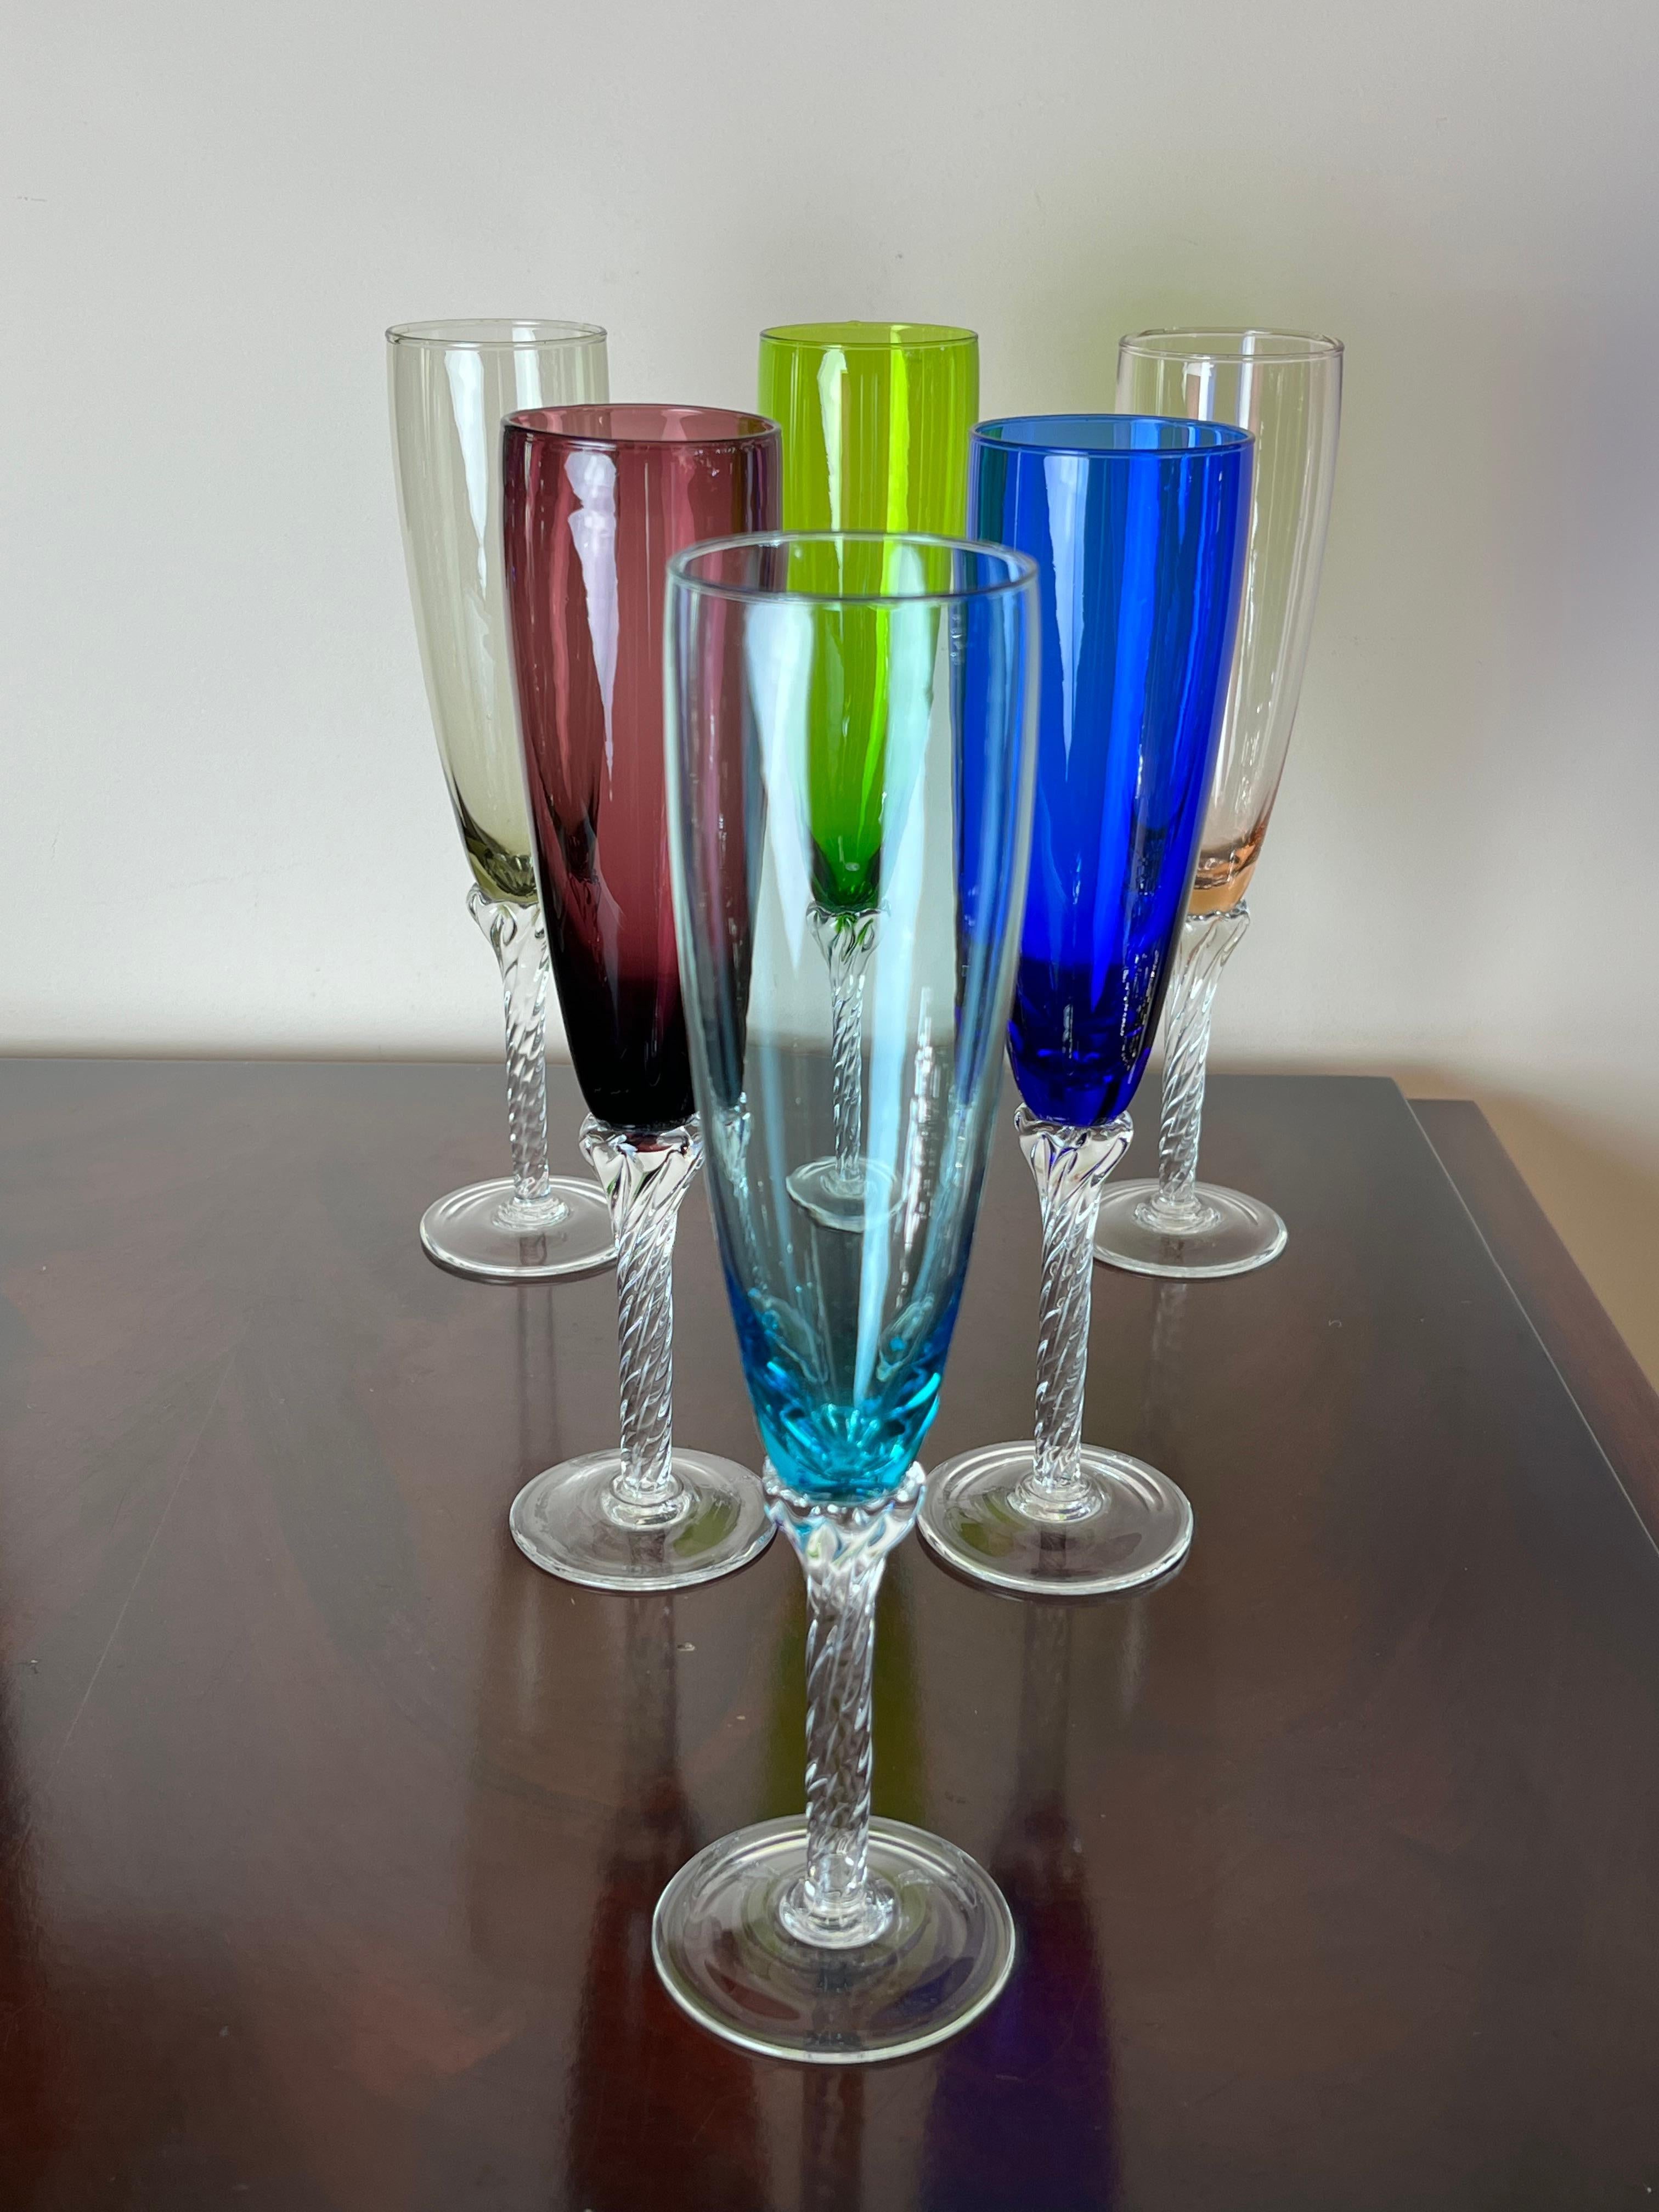 6 colored Murano glass goblets, Italy, 1960s
Purchased by my maternal grandfather in one of the most important shops in Piazza San Marco in Venice.
Small air bubbles can be glimpsed inside the glass which attest to the authenticity of the